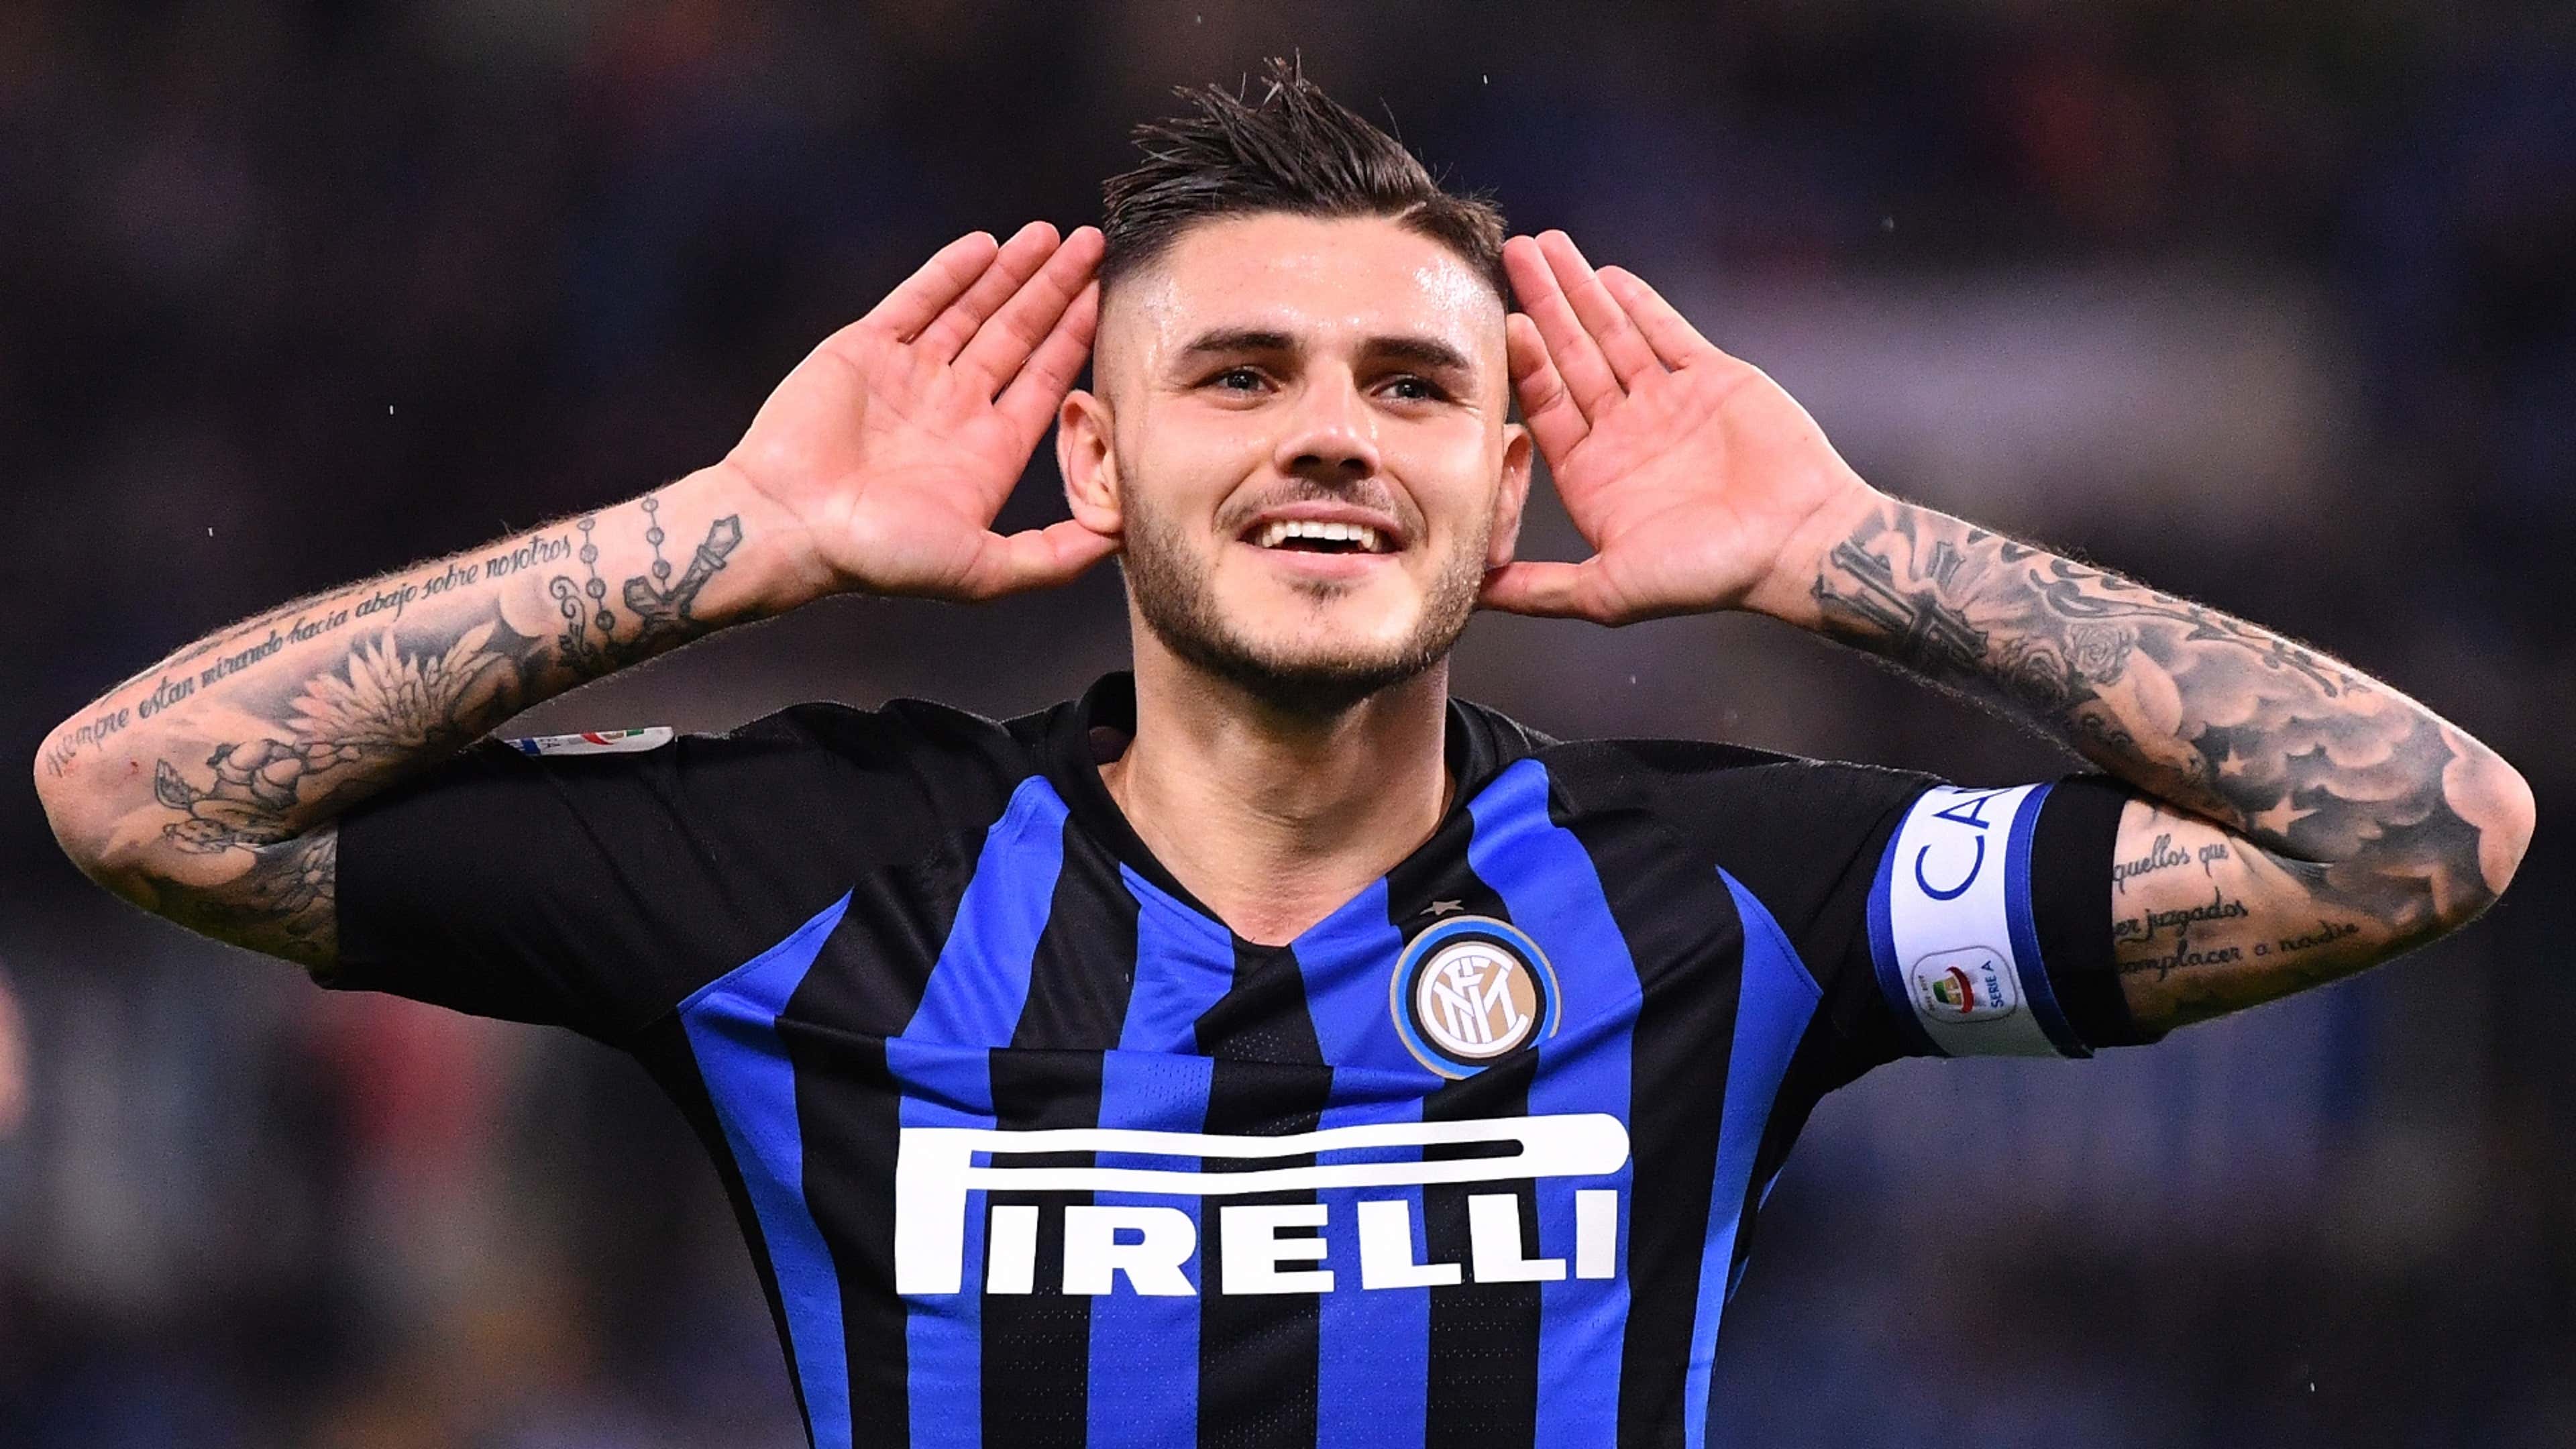 Transfer news: Argentine striker Mauro Icardi has moved from